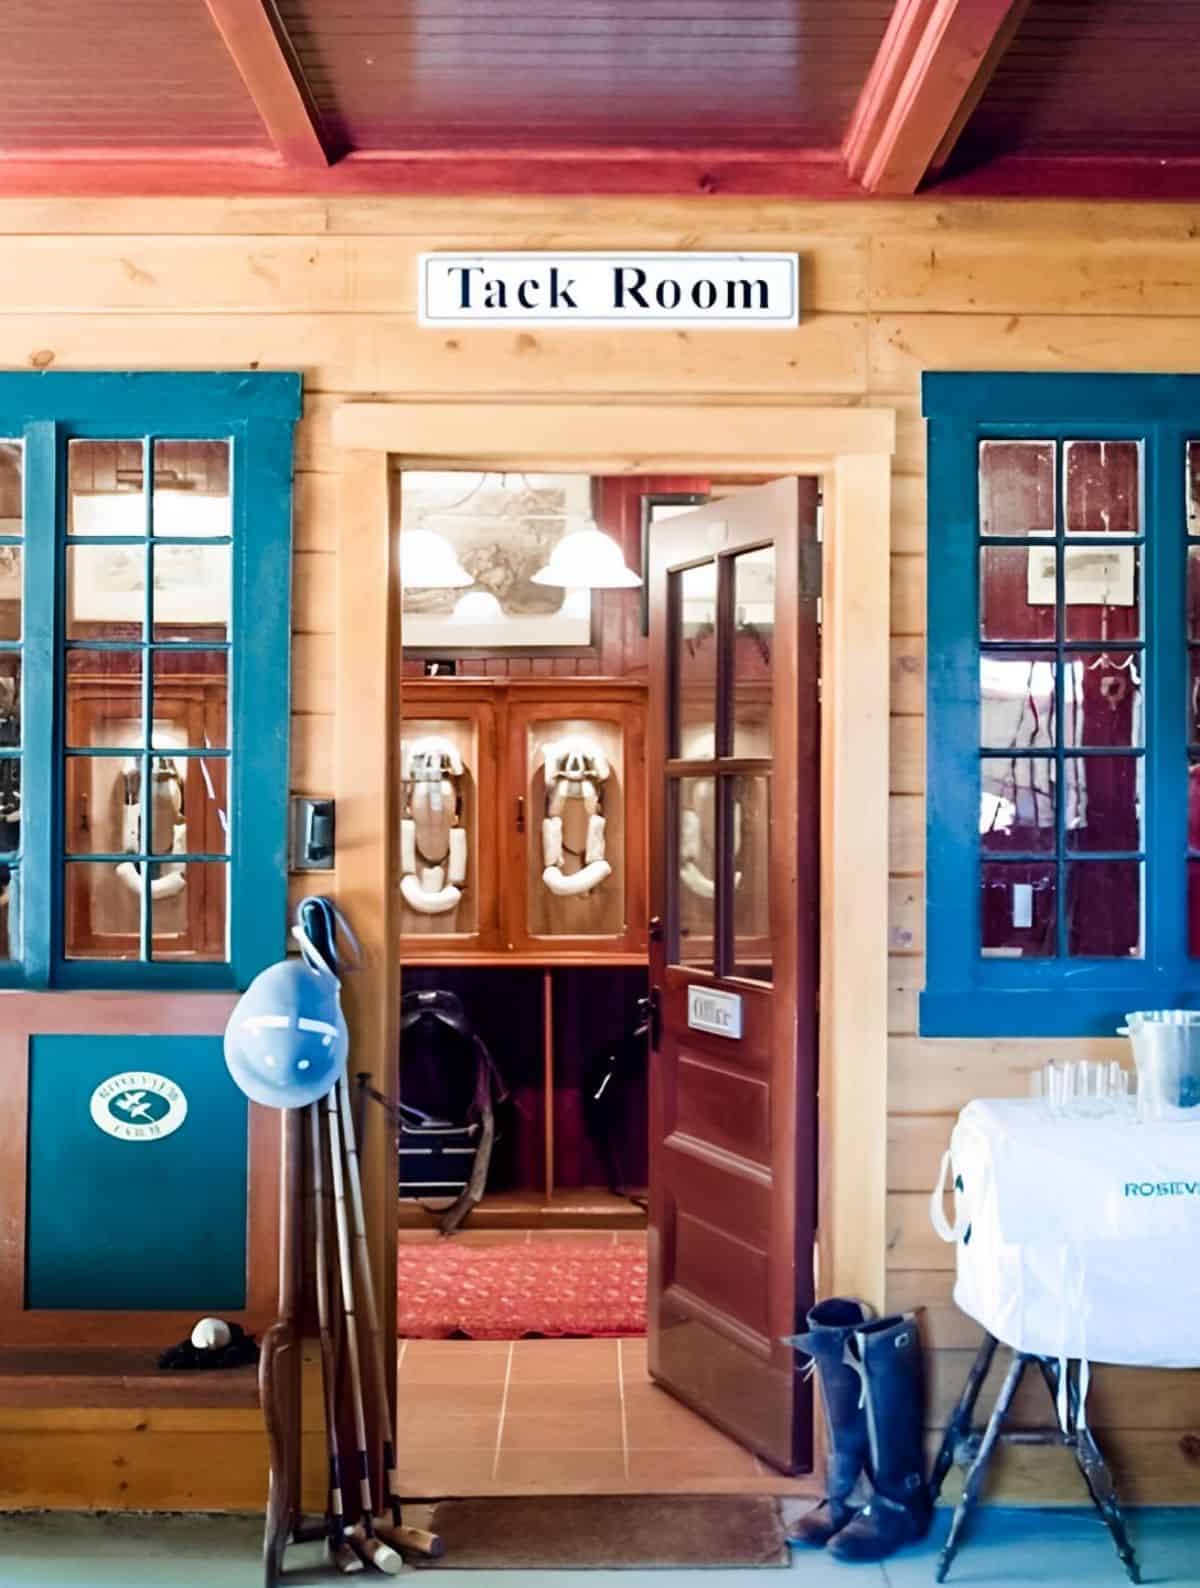 A nicely made tack room filled with horse accessories.